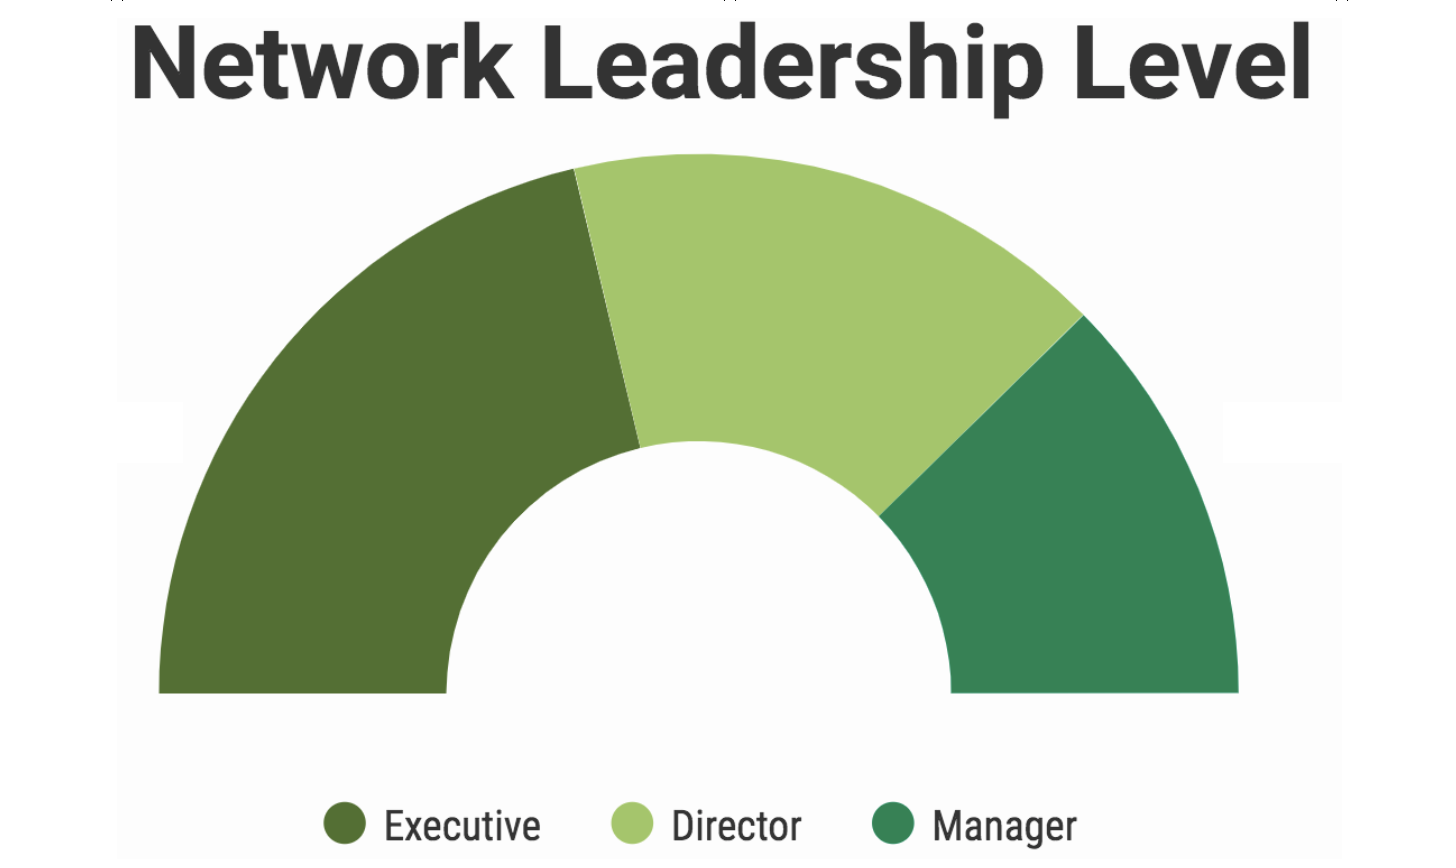 A breakdown of the leadership levels represented by LAUNCH network members